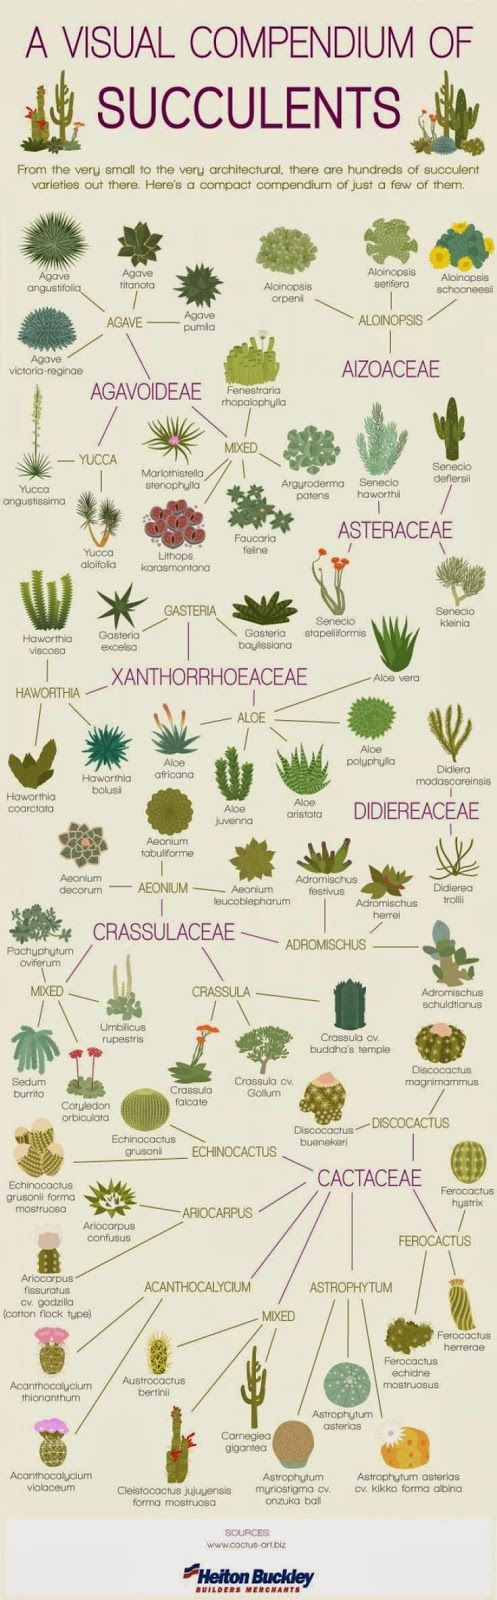 A Visual Compendium of Succulents... - From Moon t...